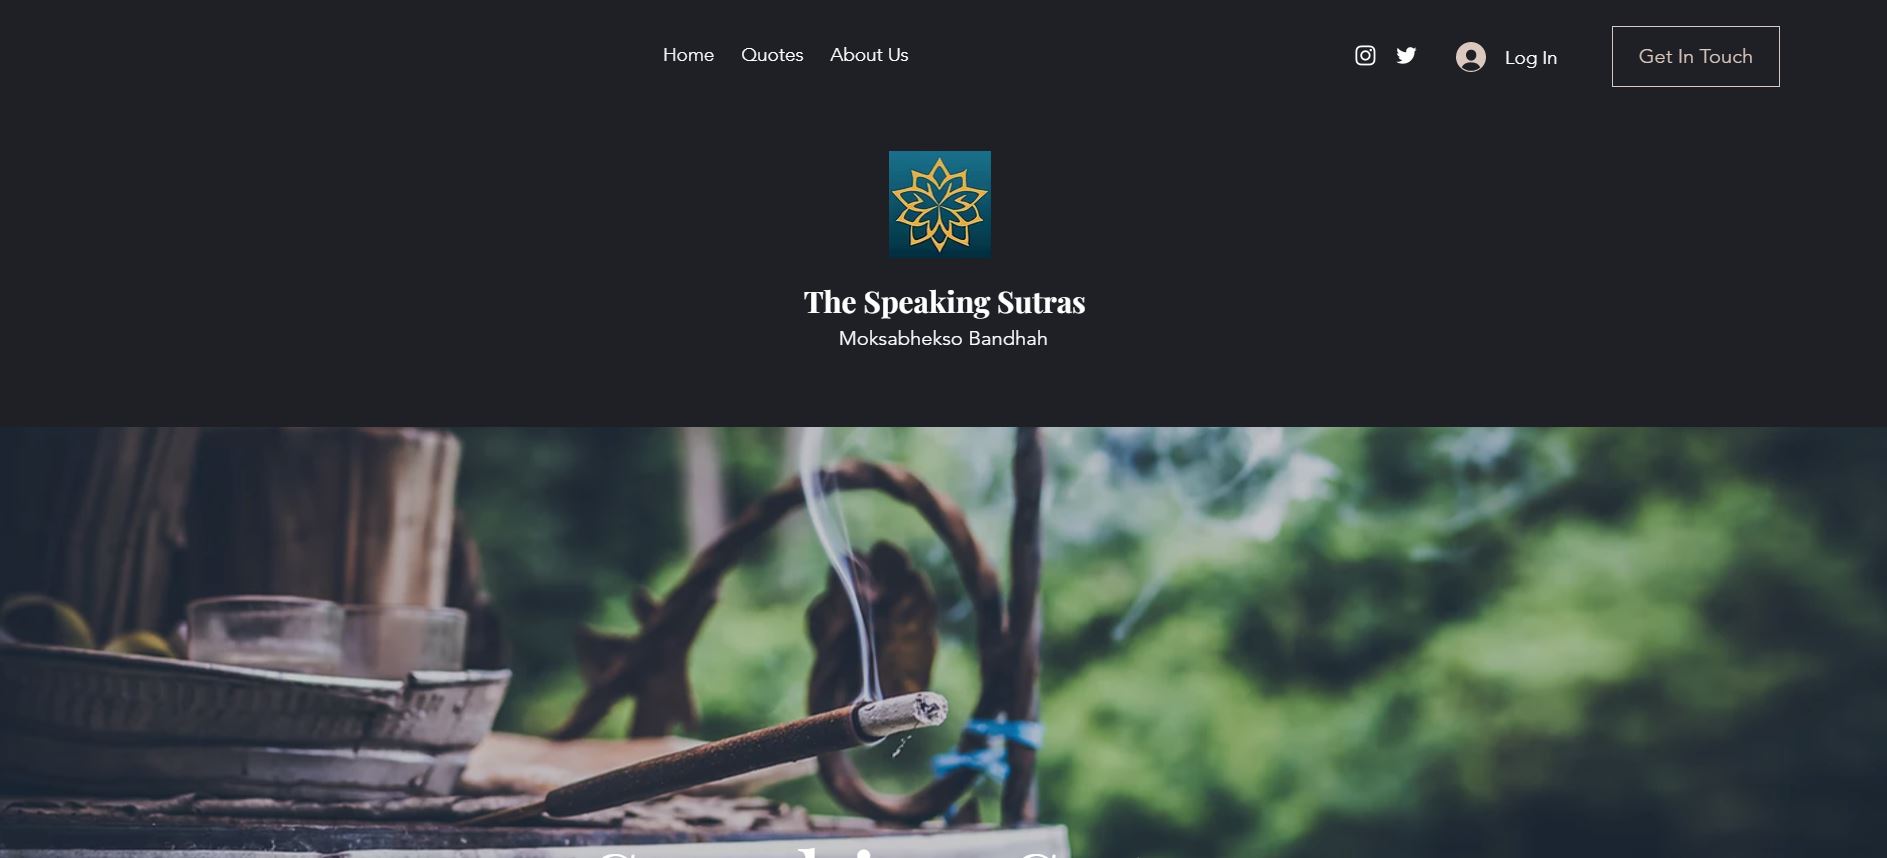 The Speaking Sutras